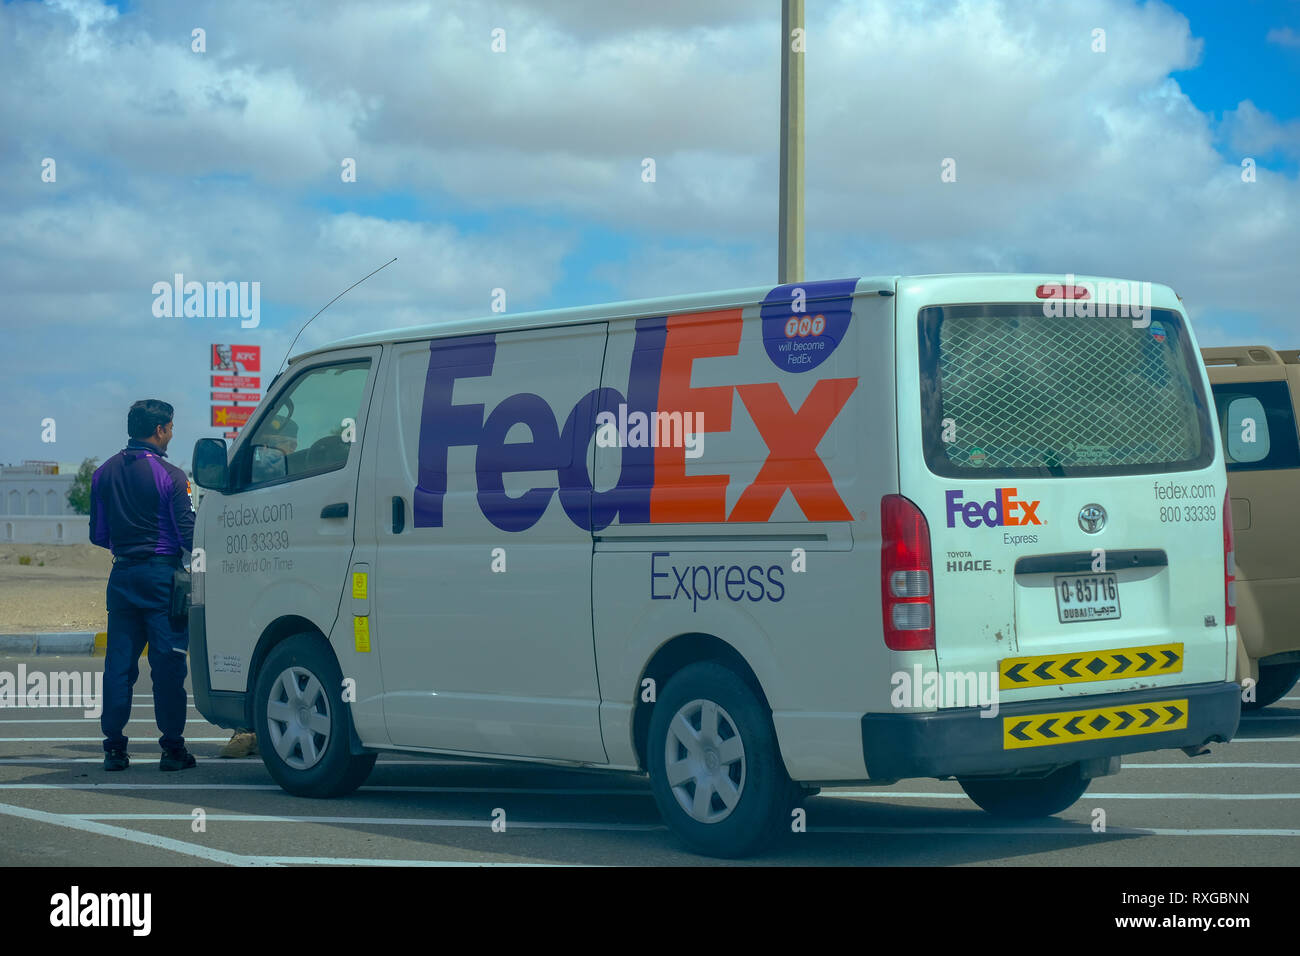 February 13, 2019 - Abu Dhabi, UAE: FedEx Express delivery van and young delivery person in Abu Dhabi, UAE Stock Photo